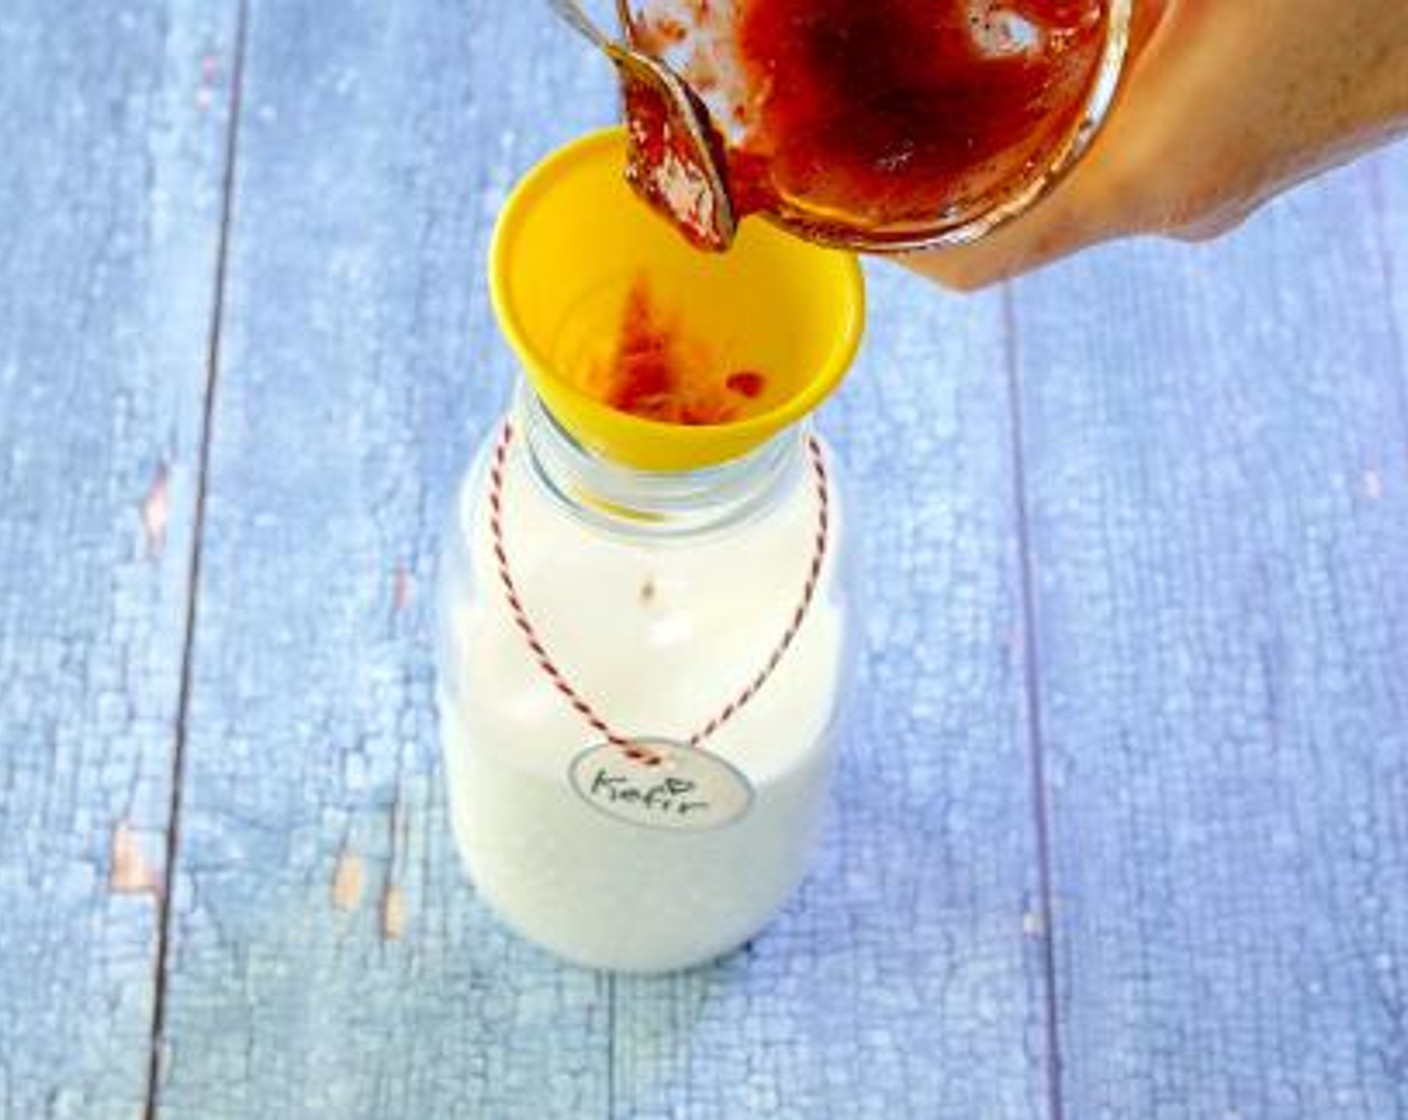 step 1 Add you favorite Fruit Jam (2 Tbsp) to the Milk Kefir (4 cups) and stir or shake vigorously until jam is thoroughly mixed in. Using a funnel, pour kefir into a glass container and tighten with an airtight cap.